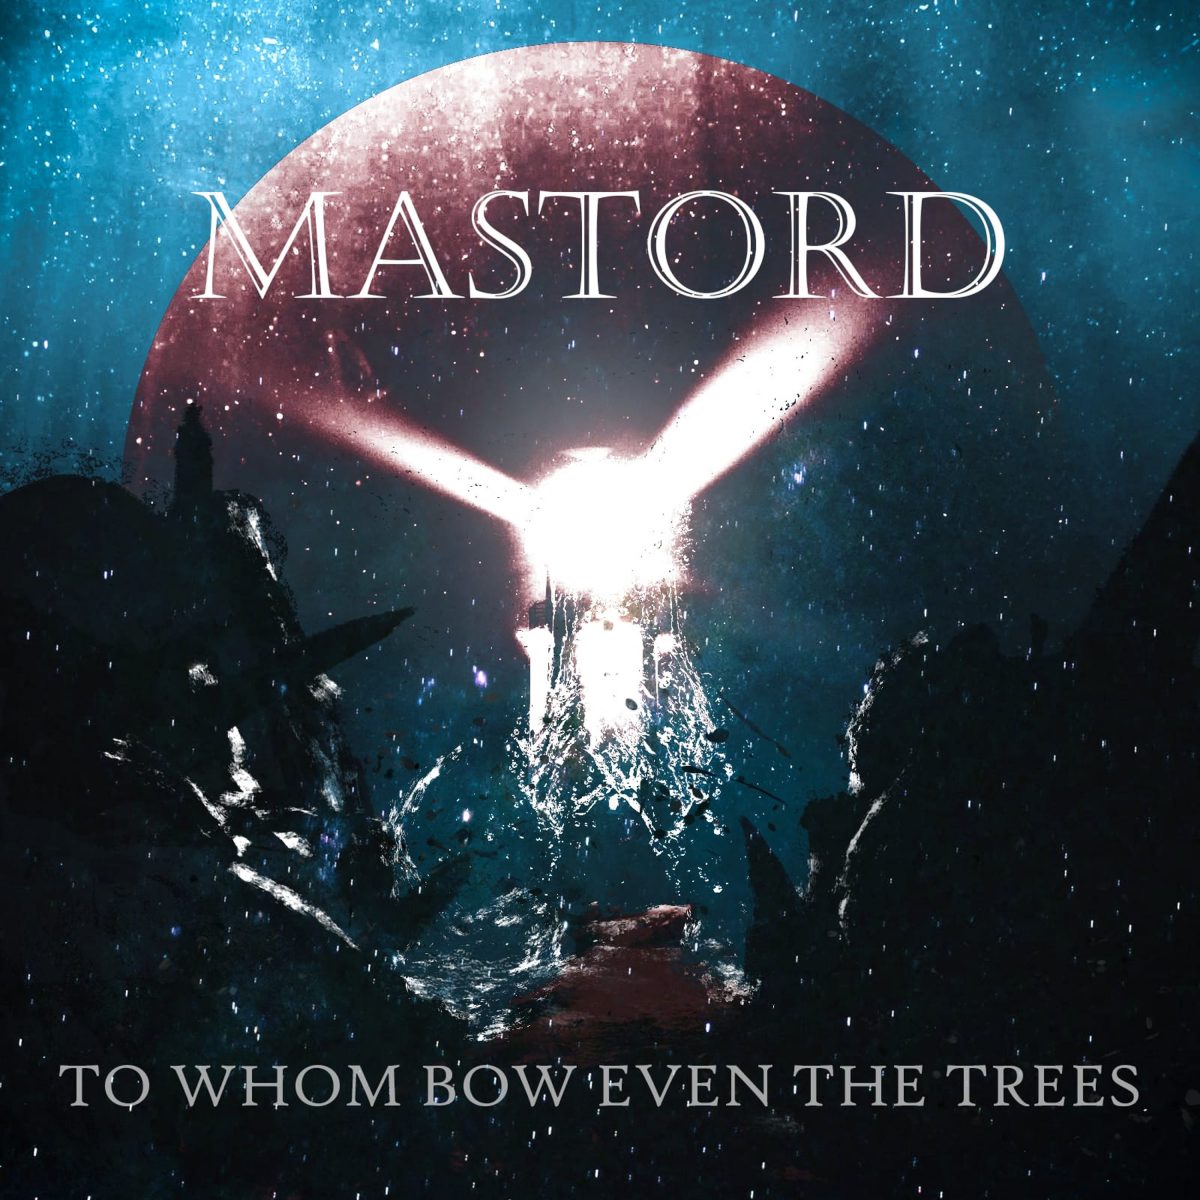 MASTORD - Albumcover - To Whom Bow Even The Trees